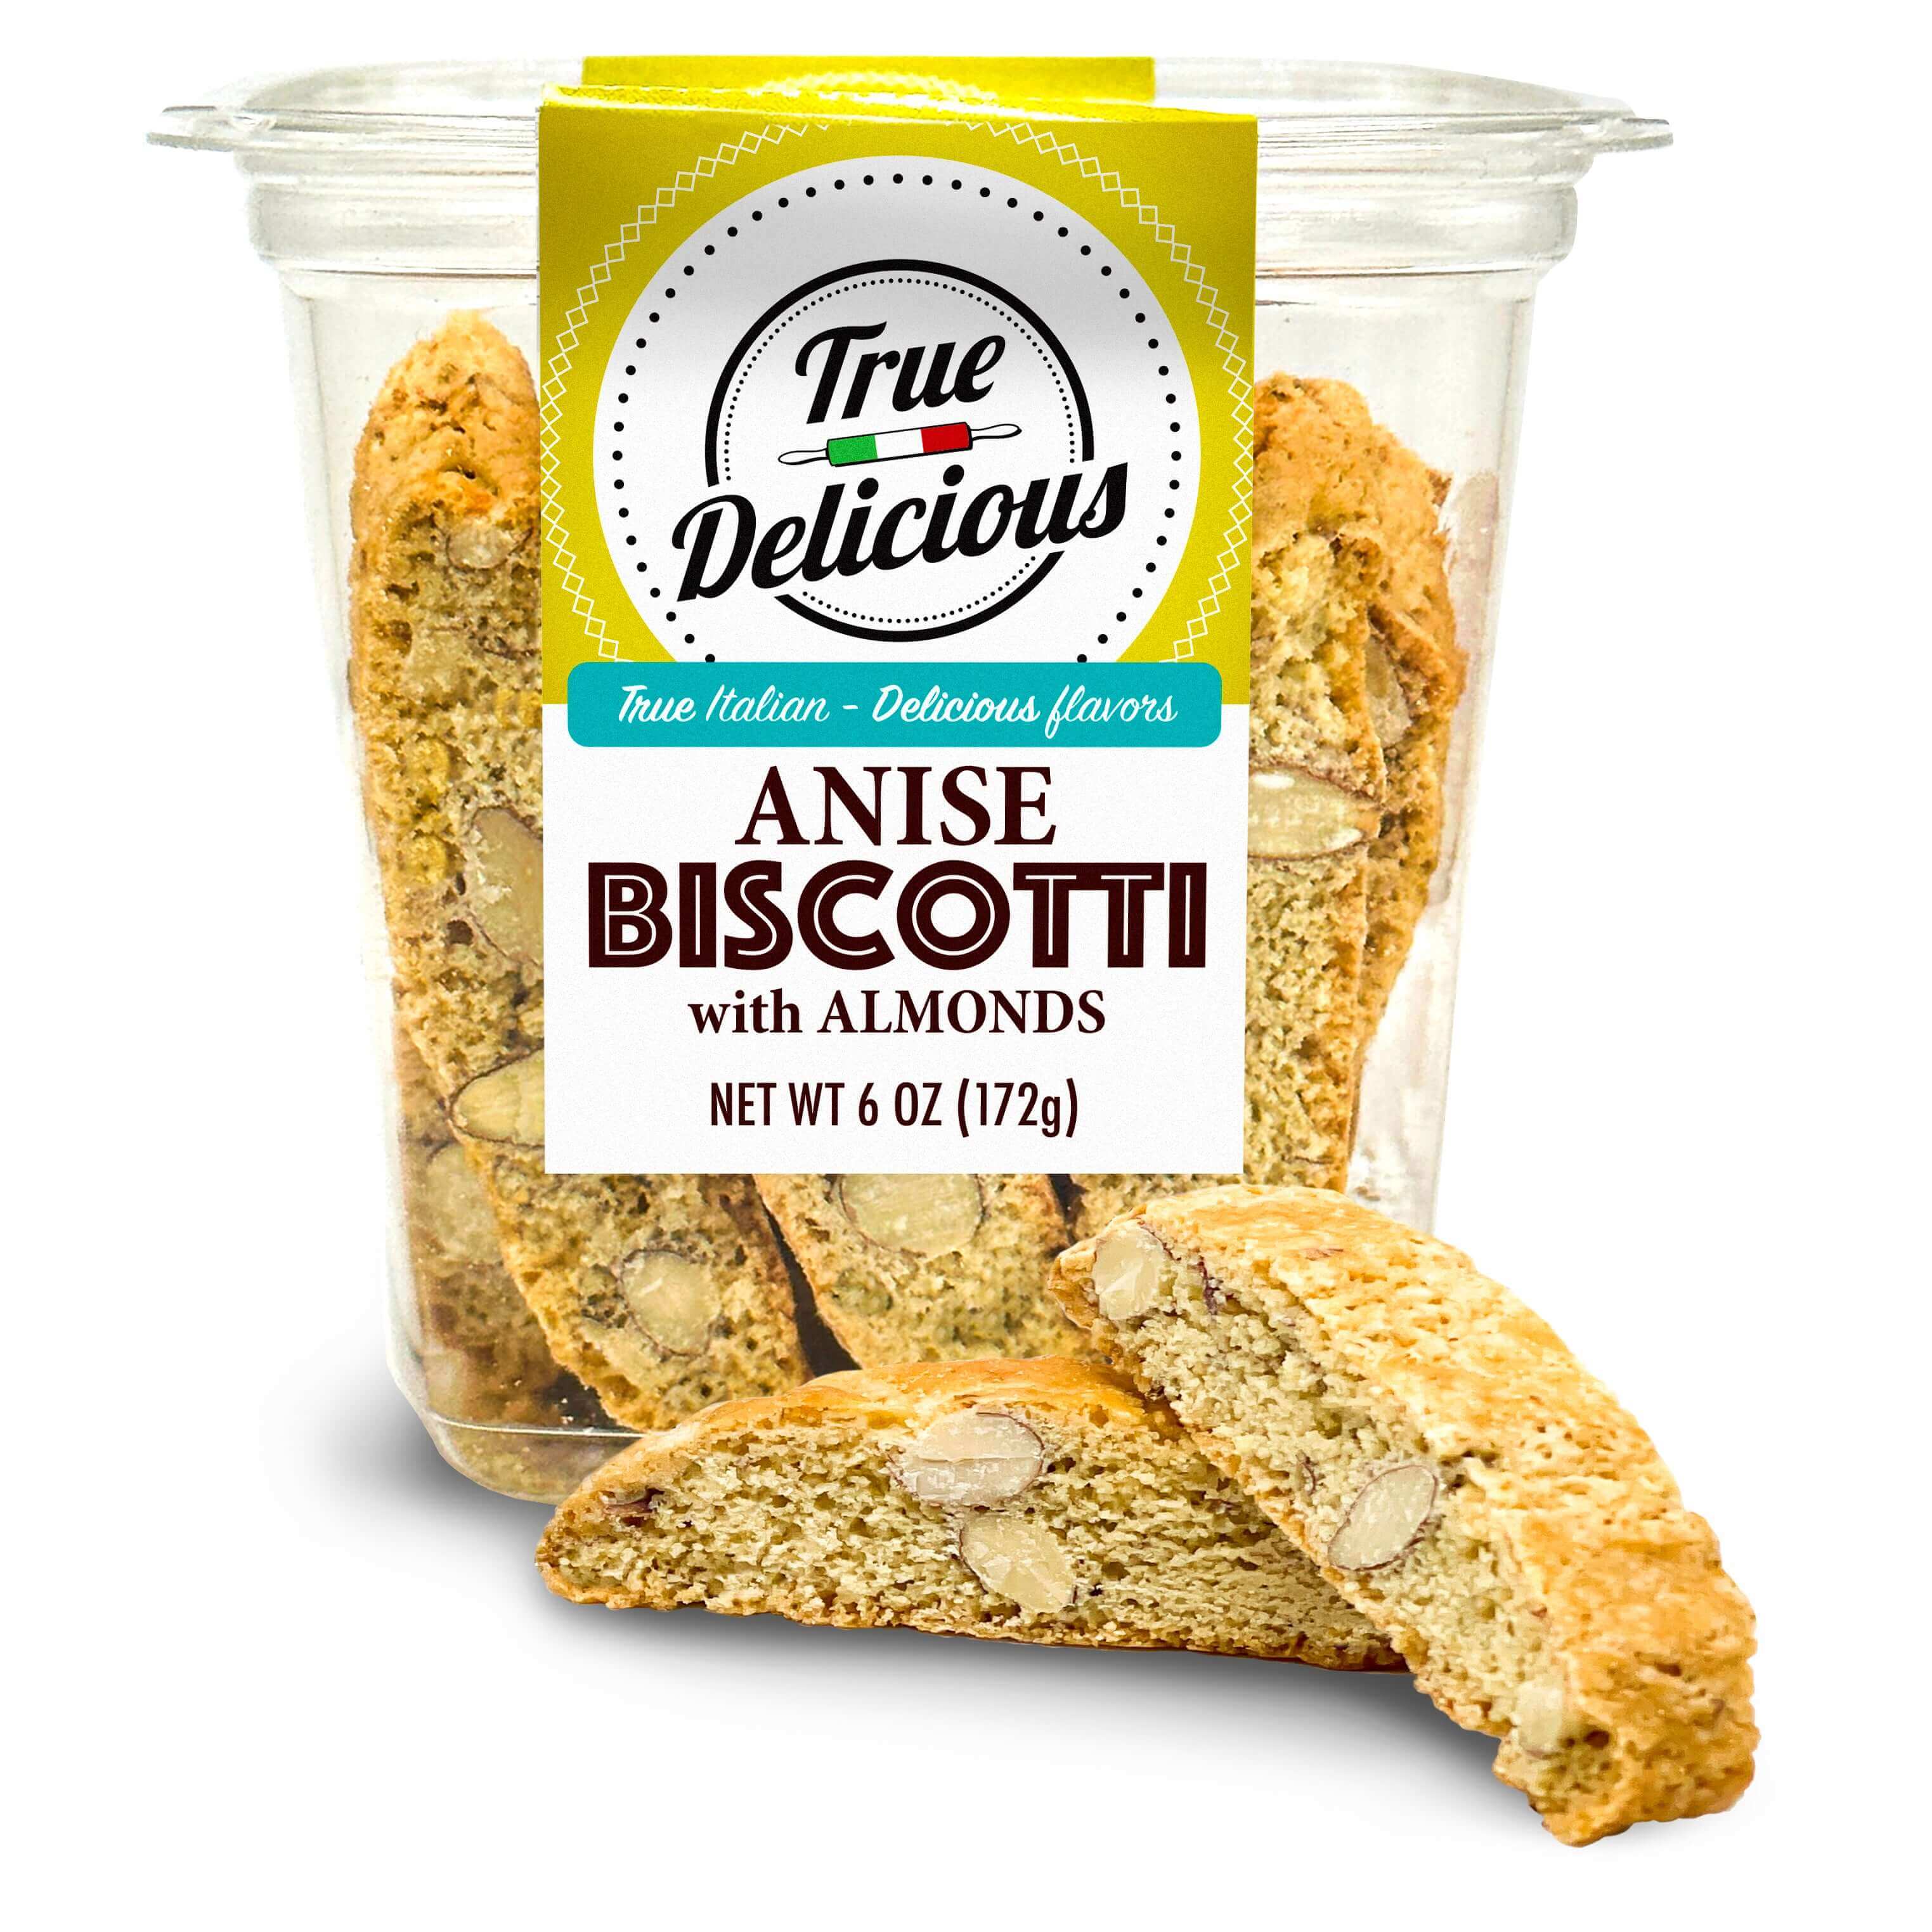 Anise Biscotti (Pan d'Anice) Think Spice… Think Anise